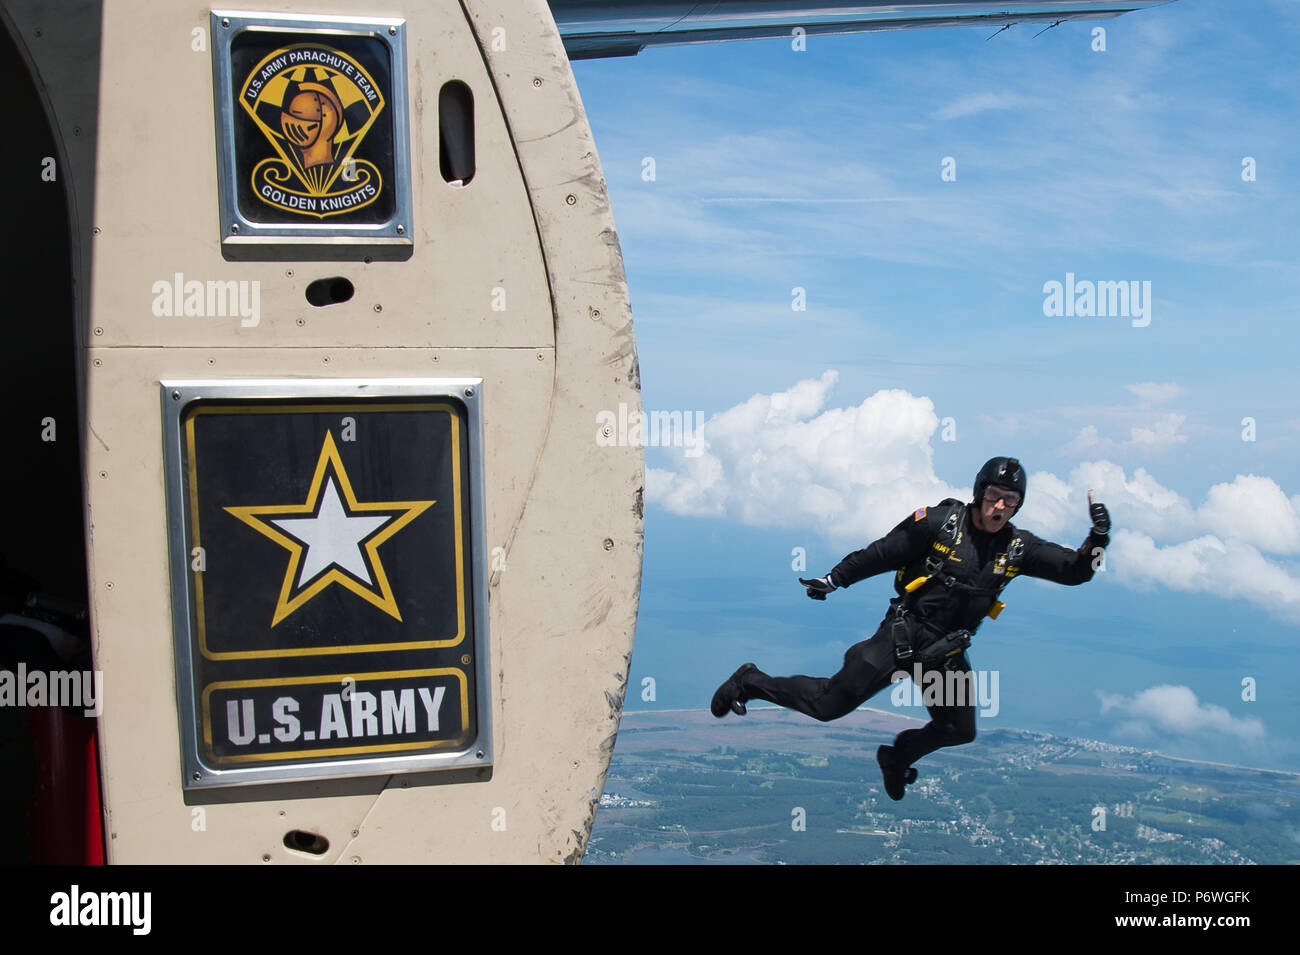 A U.S. Army Golden Knights gold demonstration team member jumps out of an aircraft during AirPower Over Hampton Roads JBLE Air and Space Expo at Joint Base Langley-Eustis, Virginia, May 20, 2018. The Golden Knights have been performing for over fifty-nine years. (U.S. Air Force photo by Airman 1st Class Tristan Biese) Stock Photo